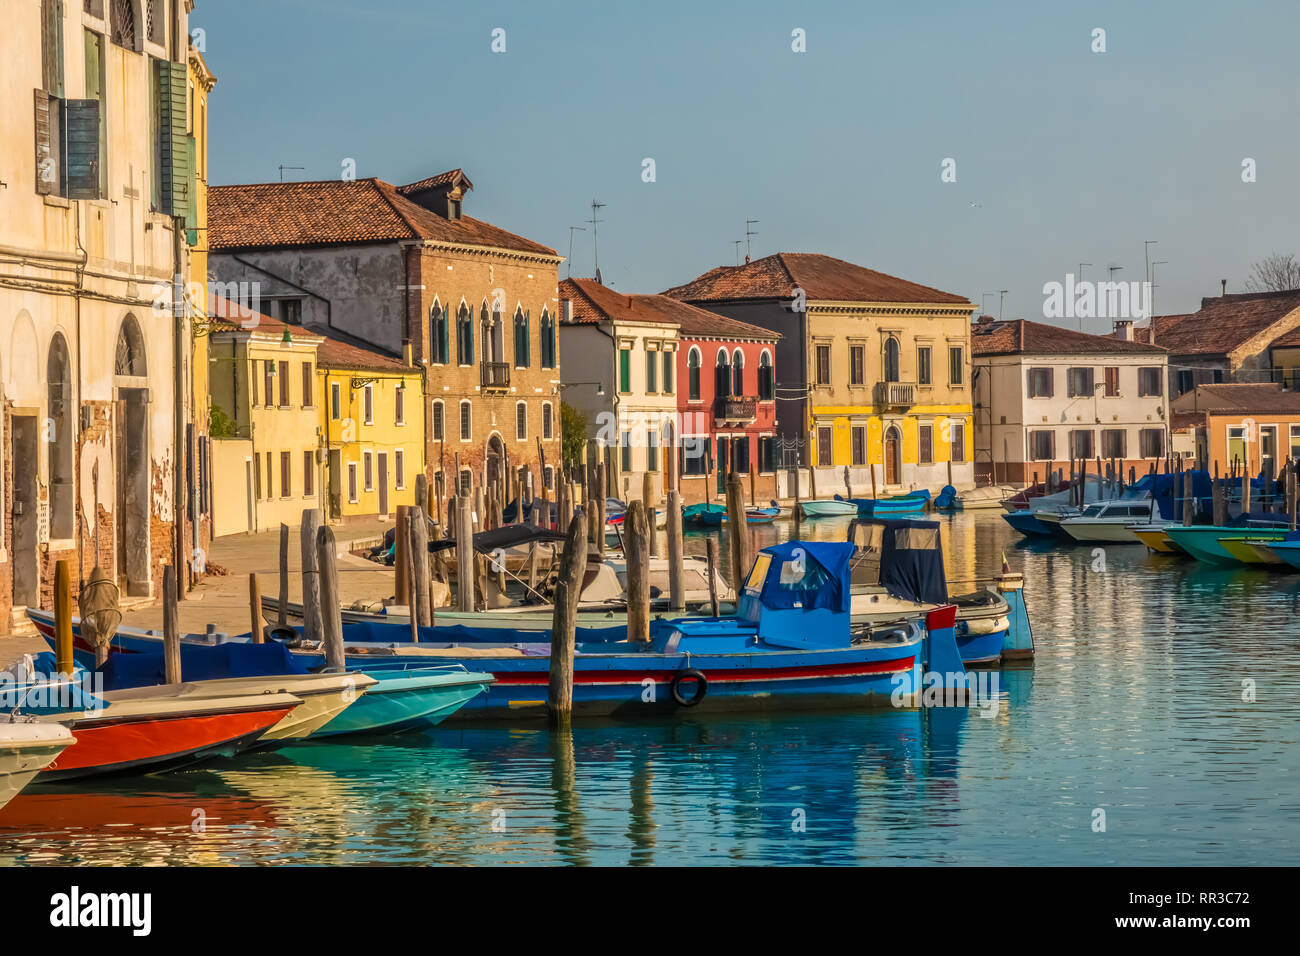 Murano Islands, famous for its glass making, Venice, capital of the Veneto region, a UNESCO World Heritage Site, northeastern Italy Stock Photo